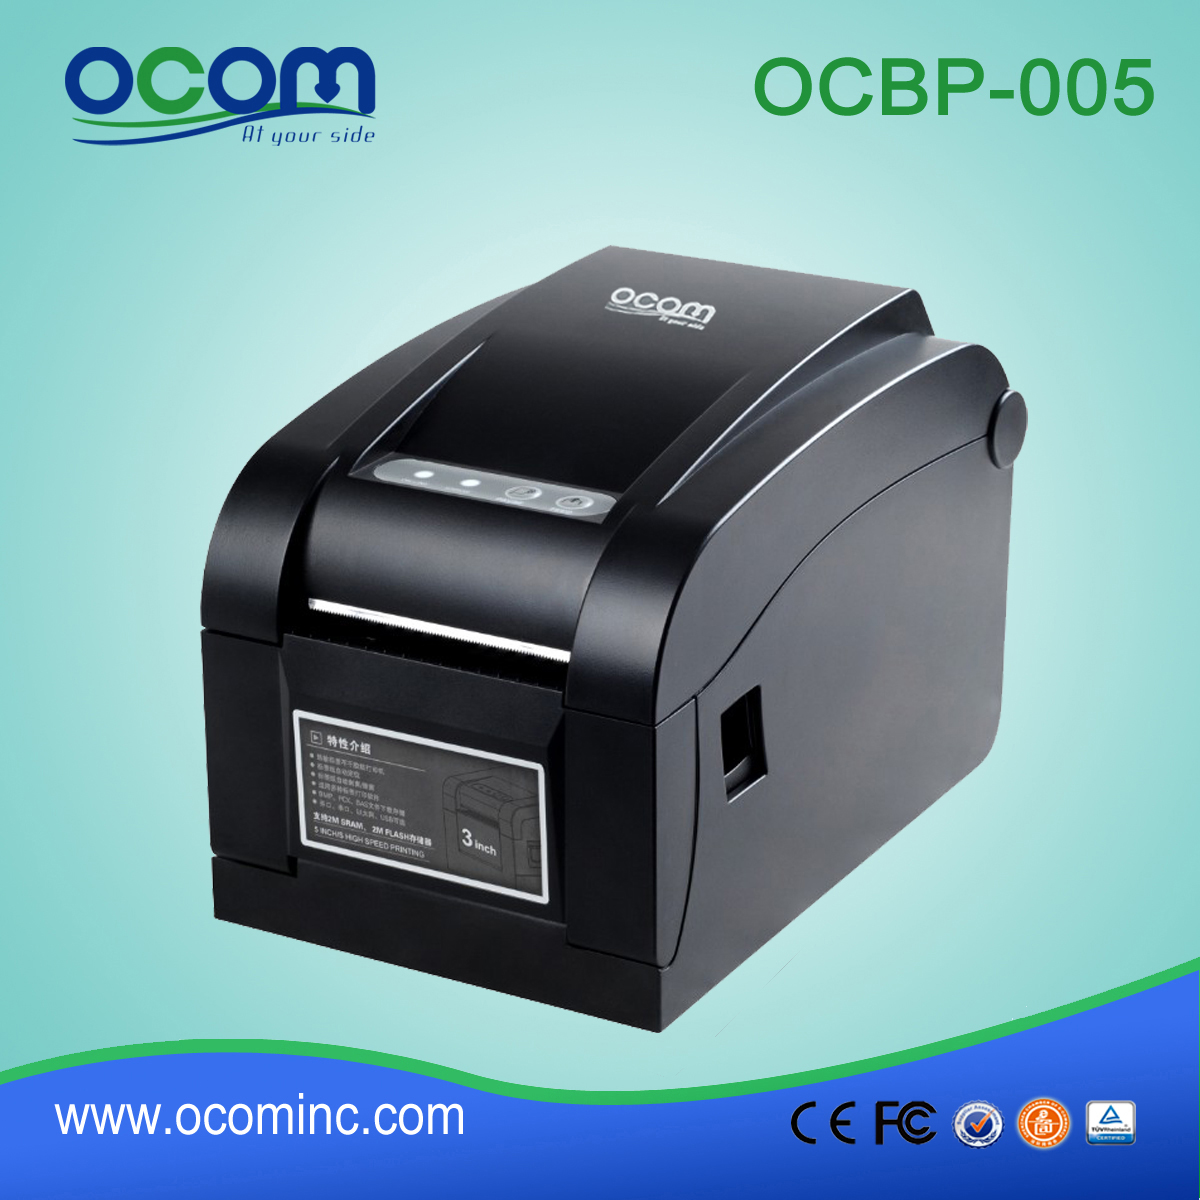 OCBP-005-URL 3inch Width Paper Thermal Barcode Label Printer With Peel Off Function